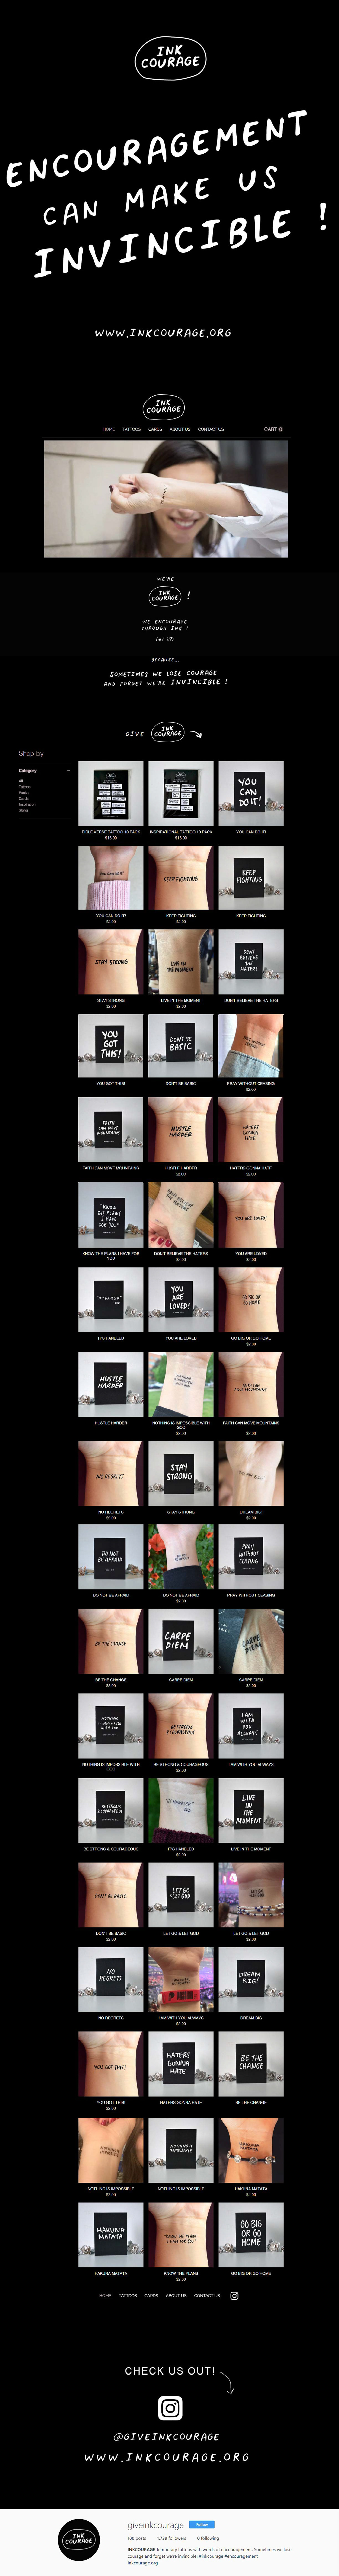 tattoos temporary cards gifts greeting cards inspiration Quotes sayings bible verses